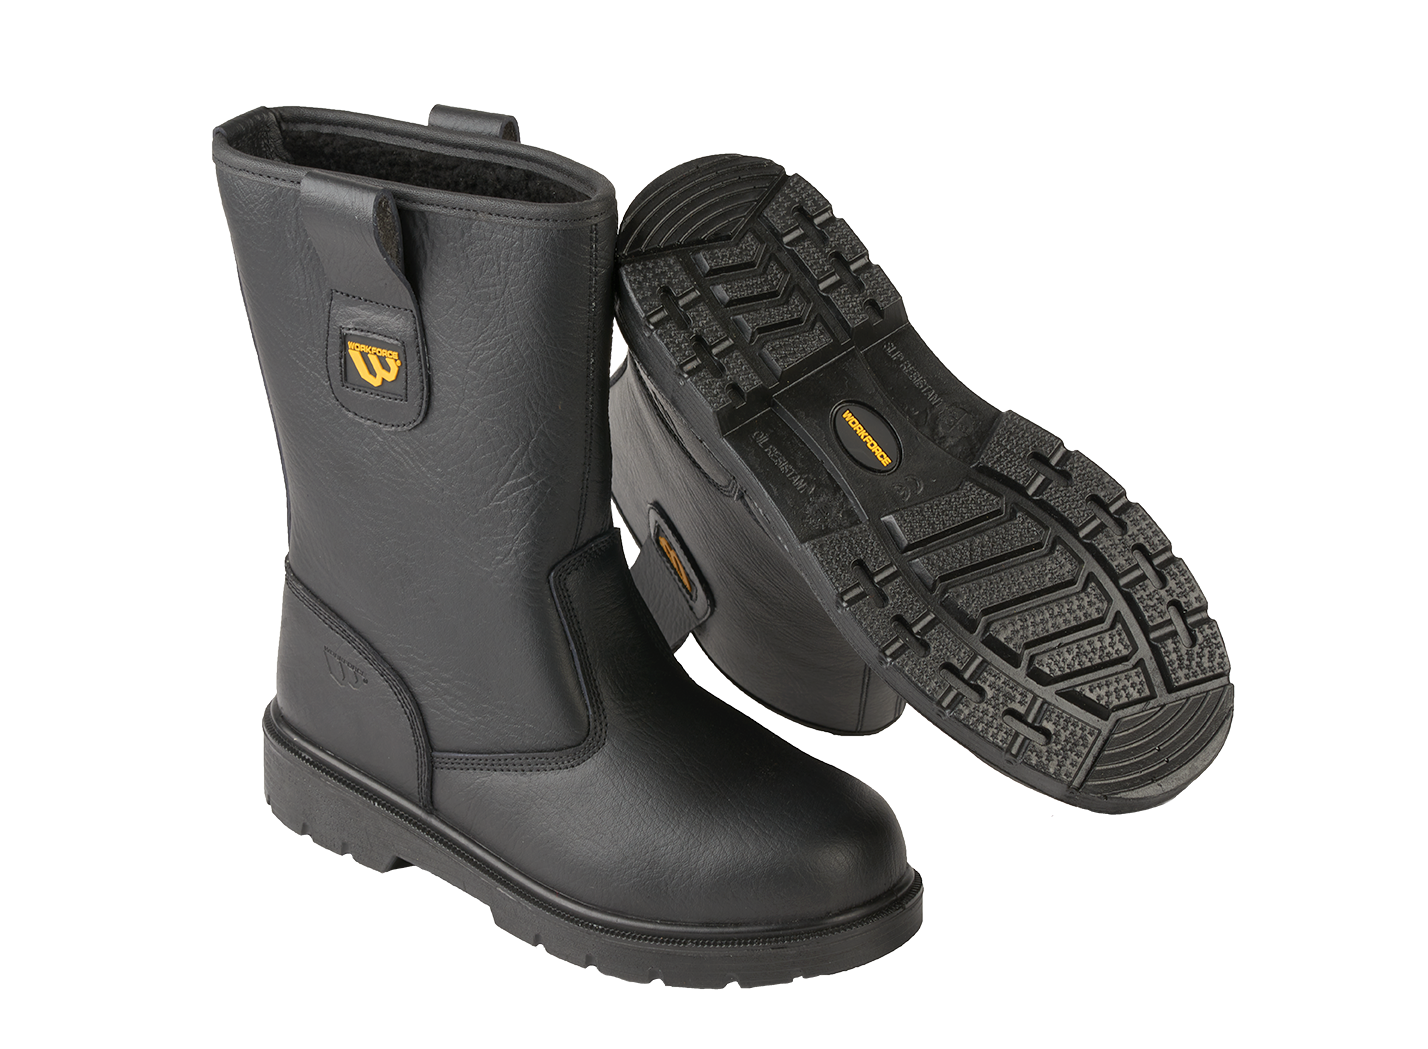 WORKFORCE RIGGER BOOT S1P SRC TOUGH BUILD FOR HEAVYDUTY TASKS (WF27)